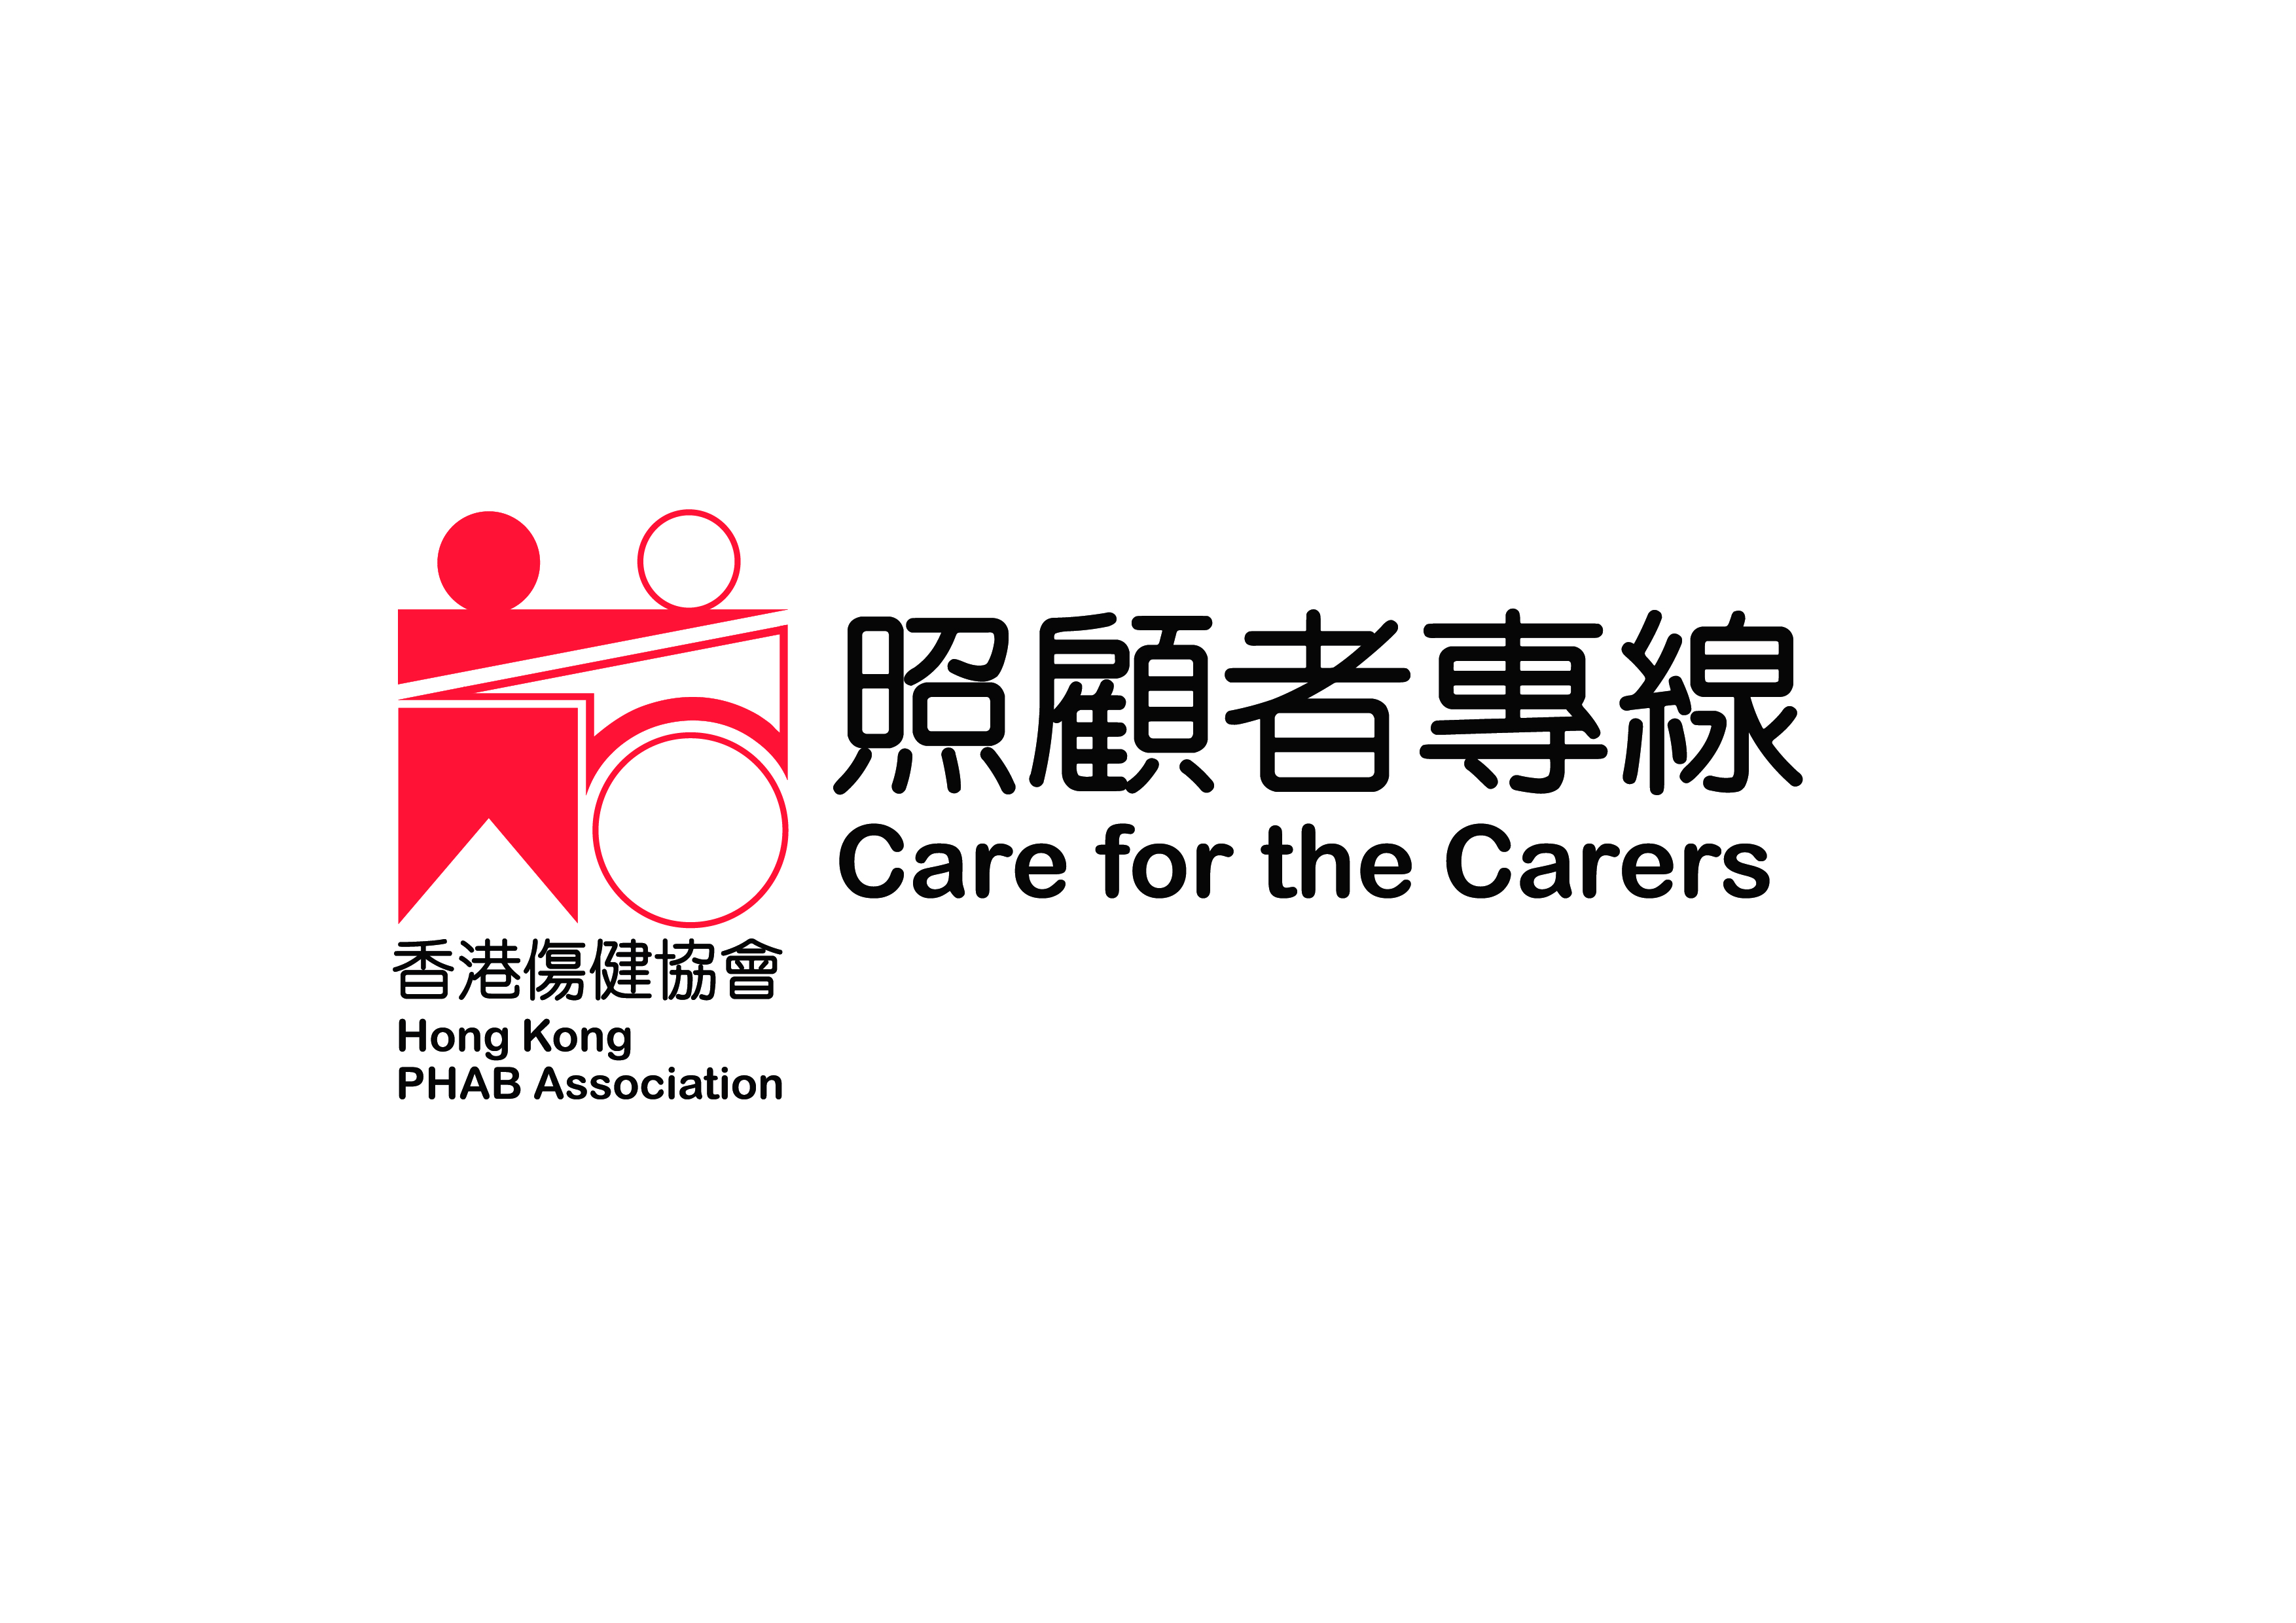 Care for the Carers